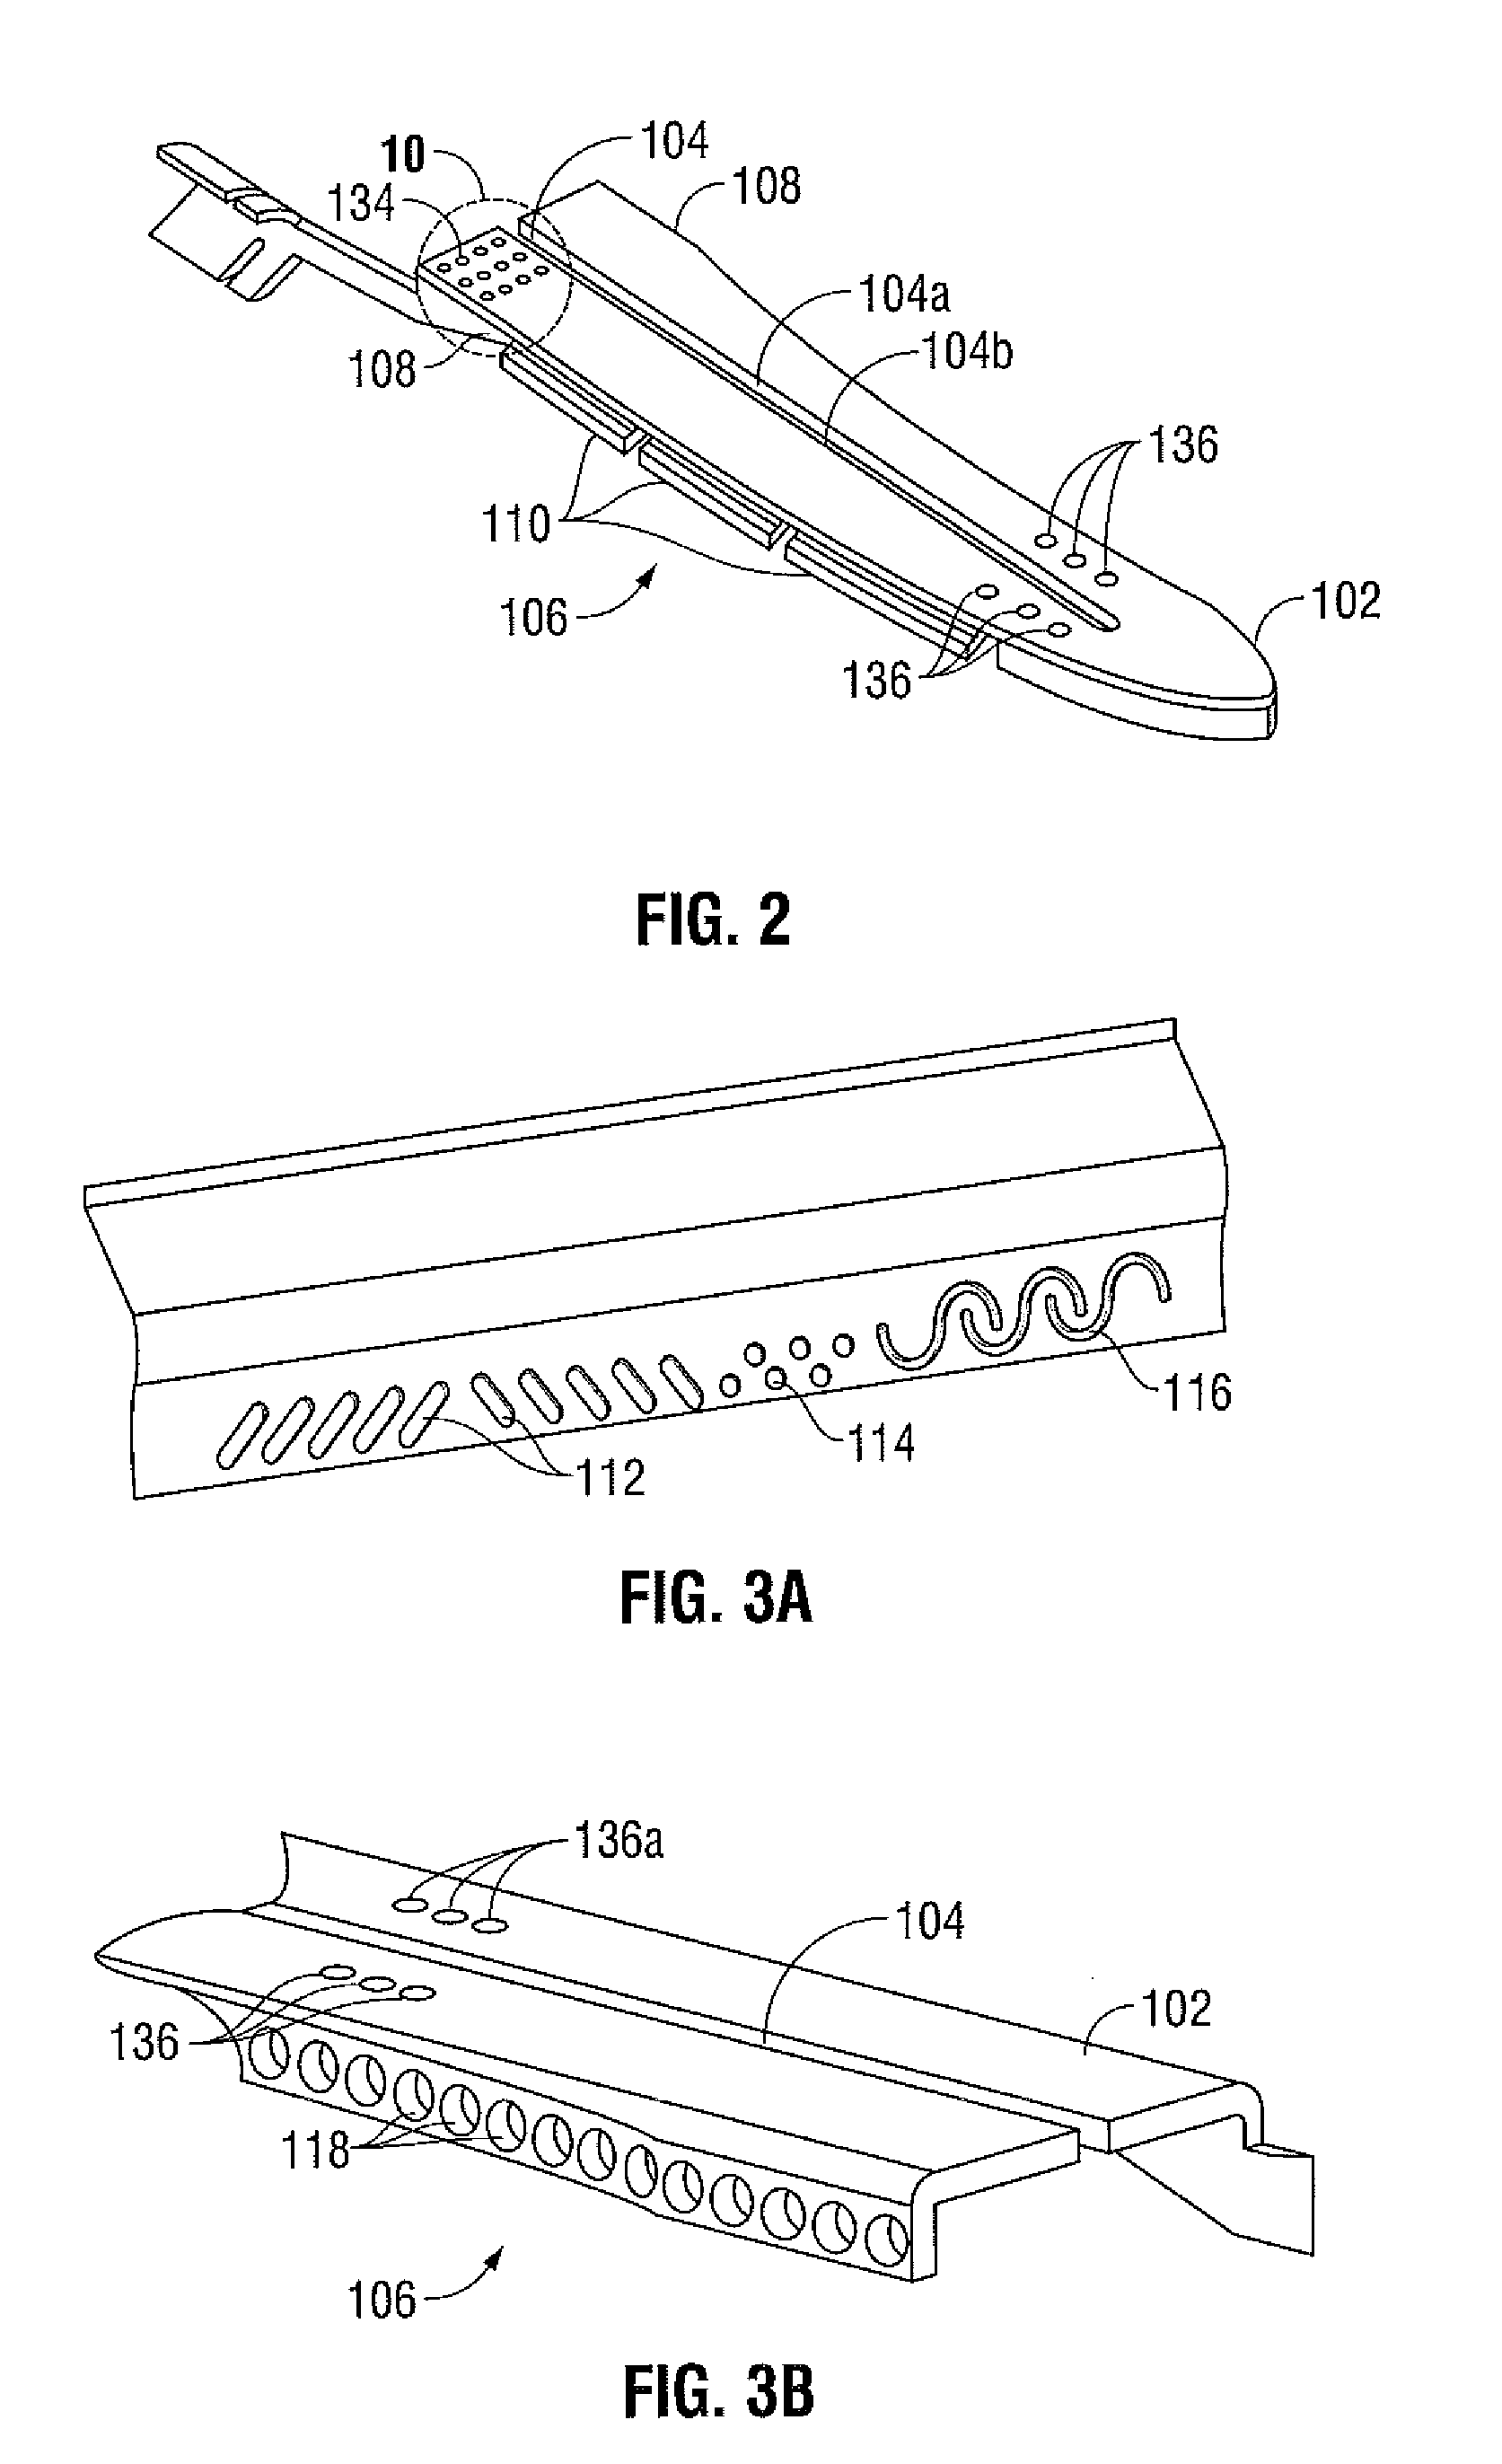 Method for manufacturing electrosurgical seal plates